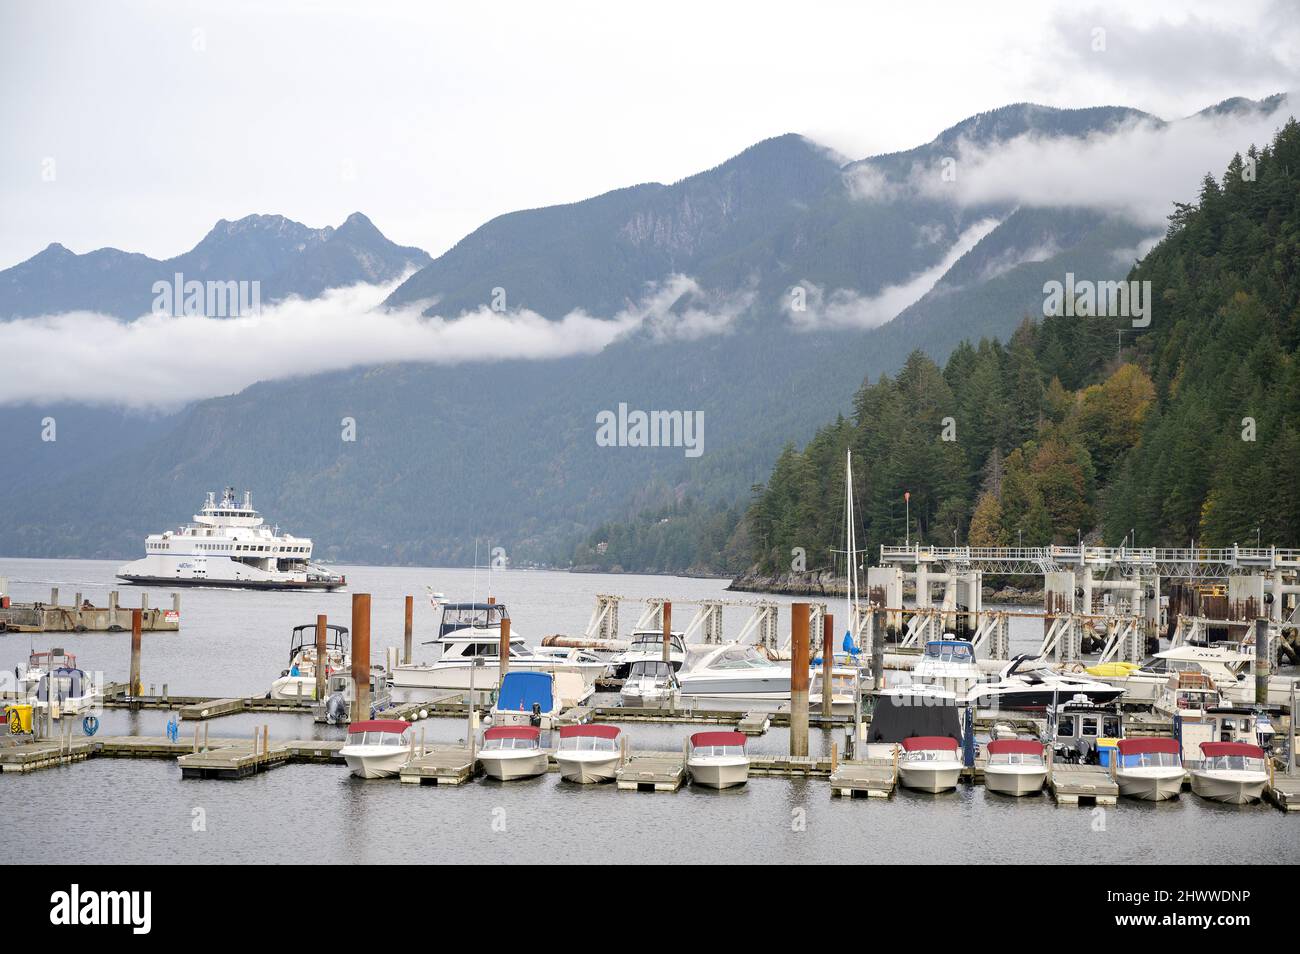 The Horseshoe Bay to Nanaimo BC ferry sailing into the ferry terminal at SewellÕs Marina.  West Vancouver, BC, Canada. Stock Photo